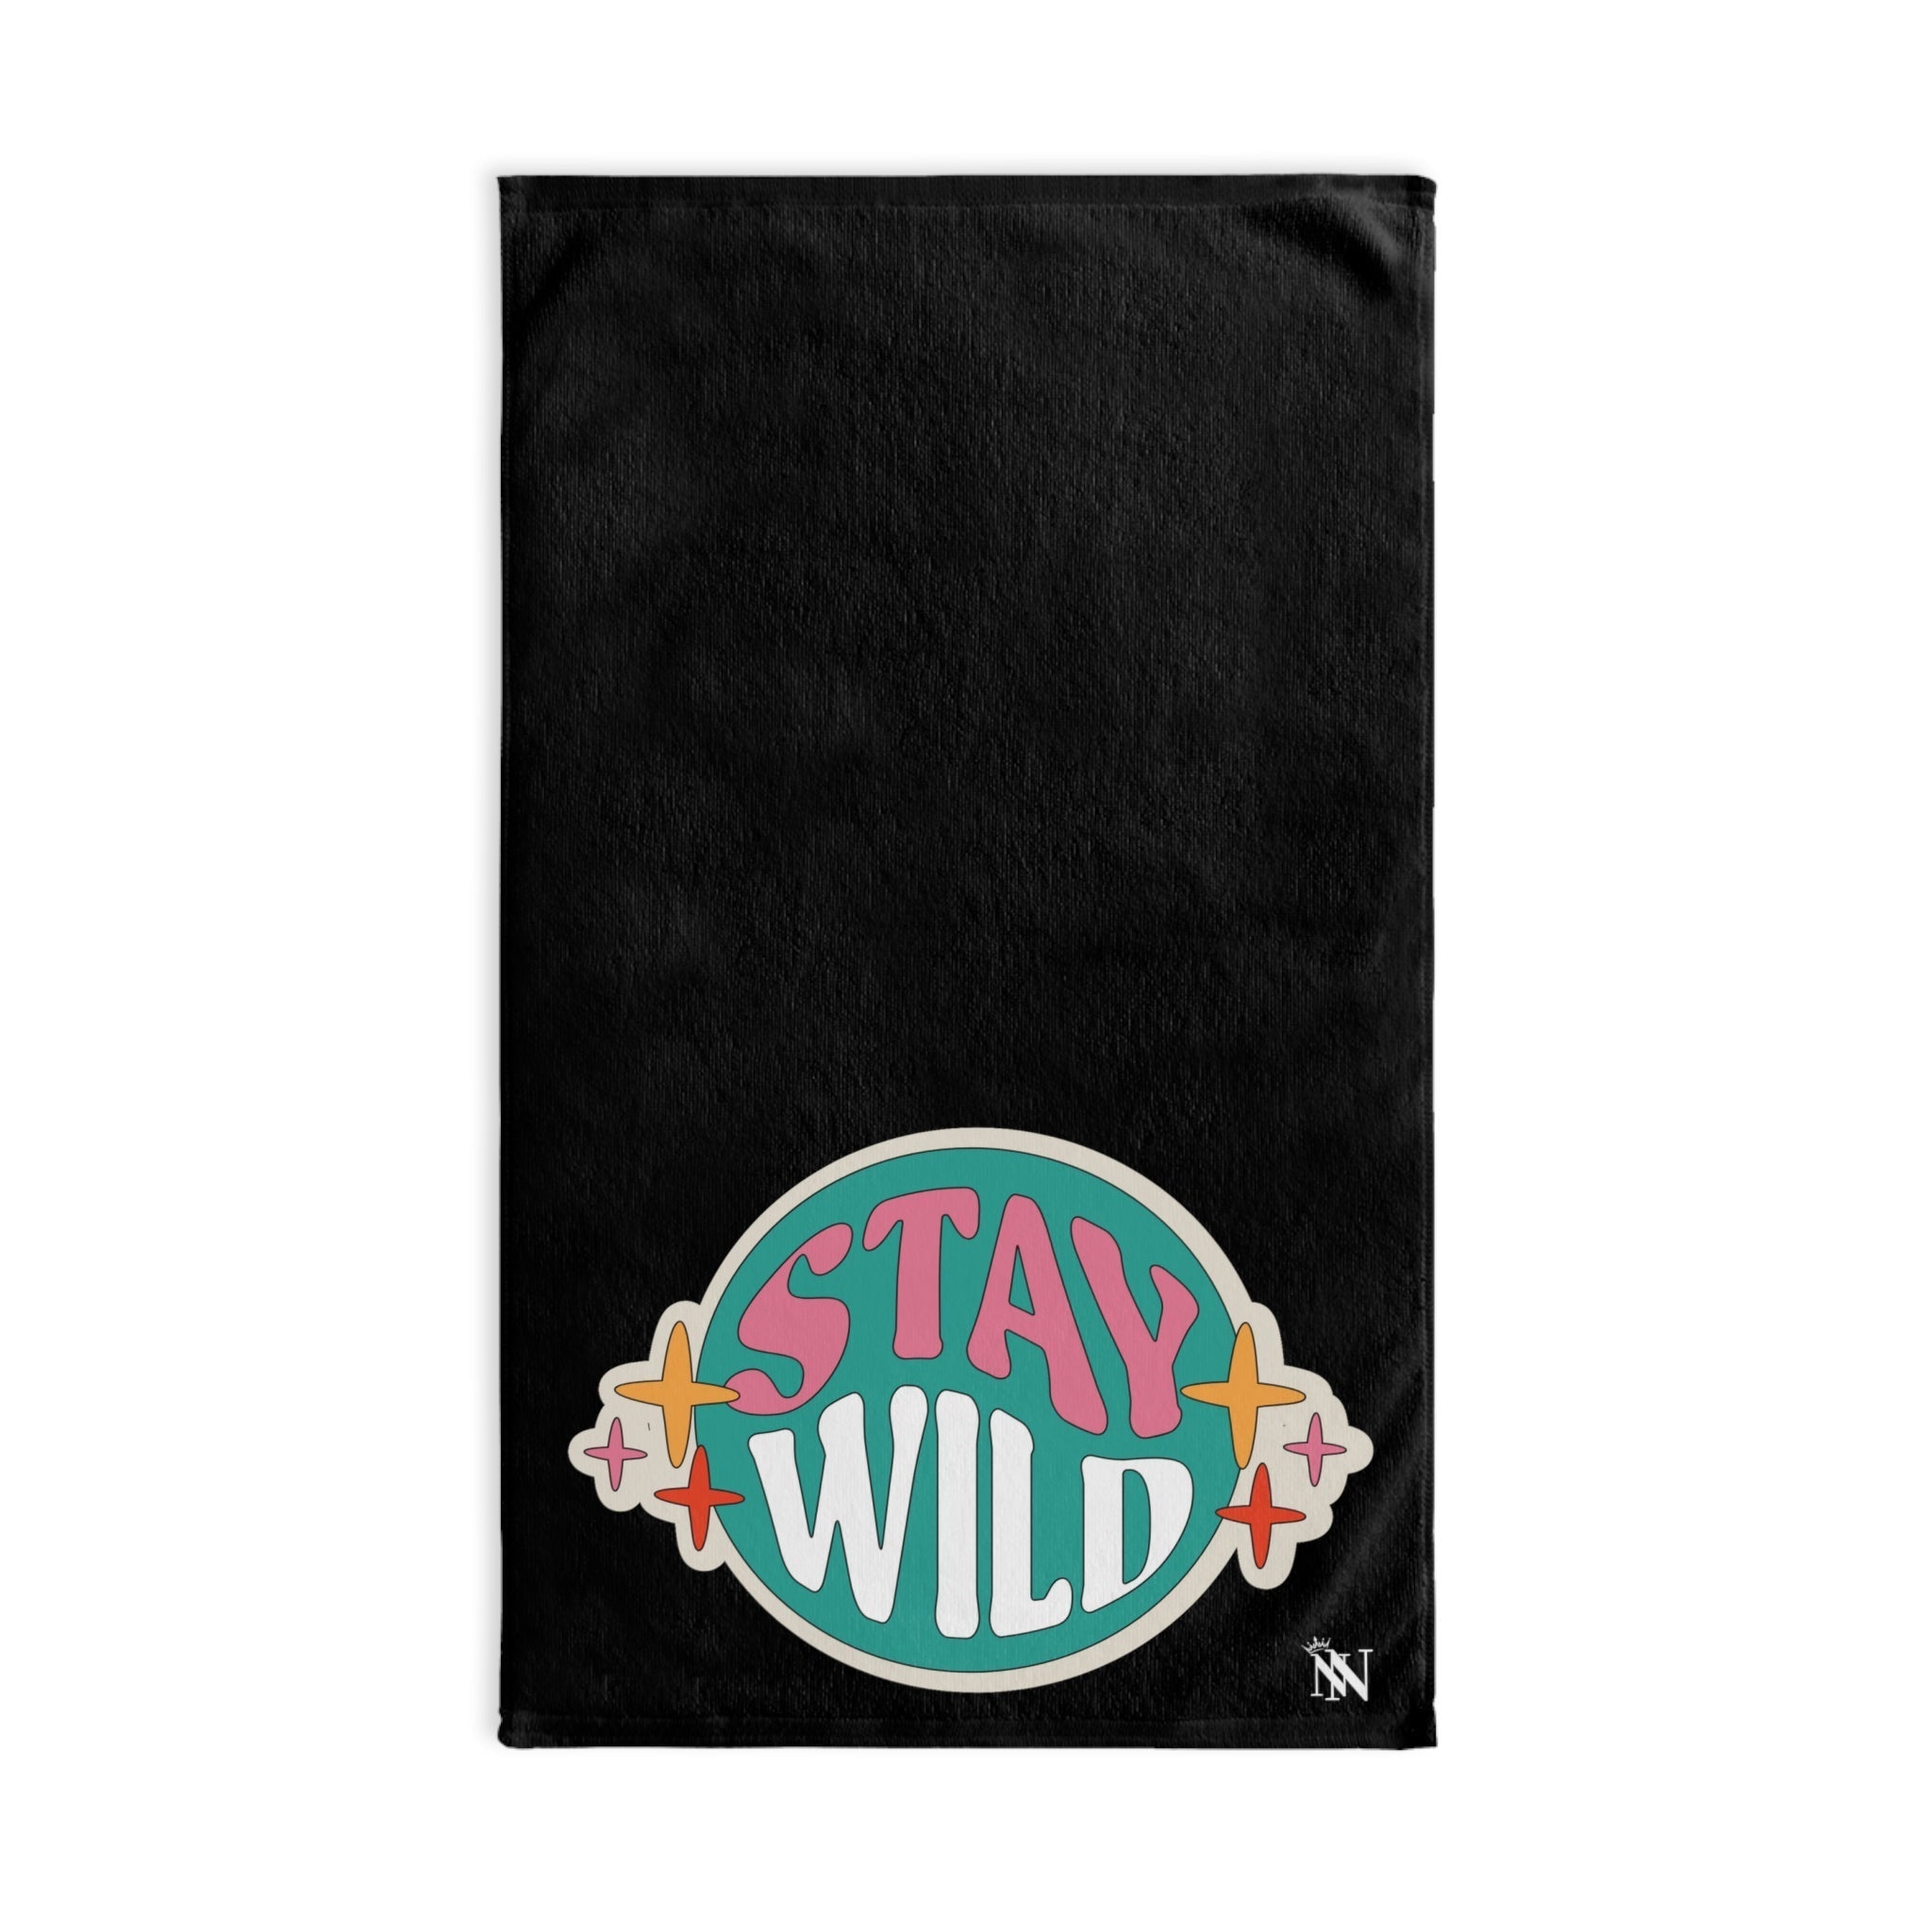 Stay Wild Boho RetroBlack | Sexy Gifts for Boyfriend, Funny Towel Romantic Gift for Wedding Couple Fiance First Year 2nd Anniversary Valentines, Party Gag Gifts, Joke Humor Cloth for Husband Men BF NECTAR NAPKINS